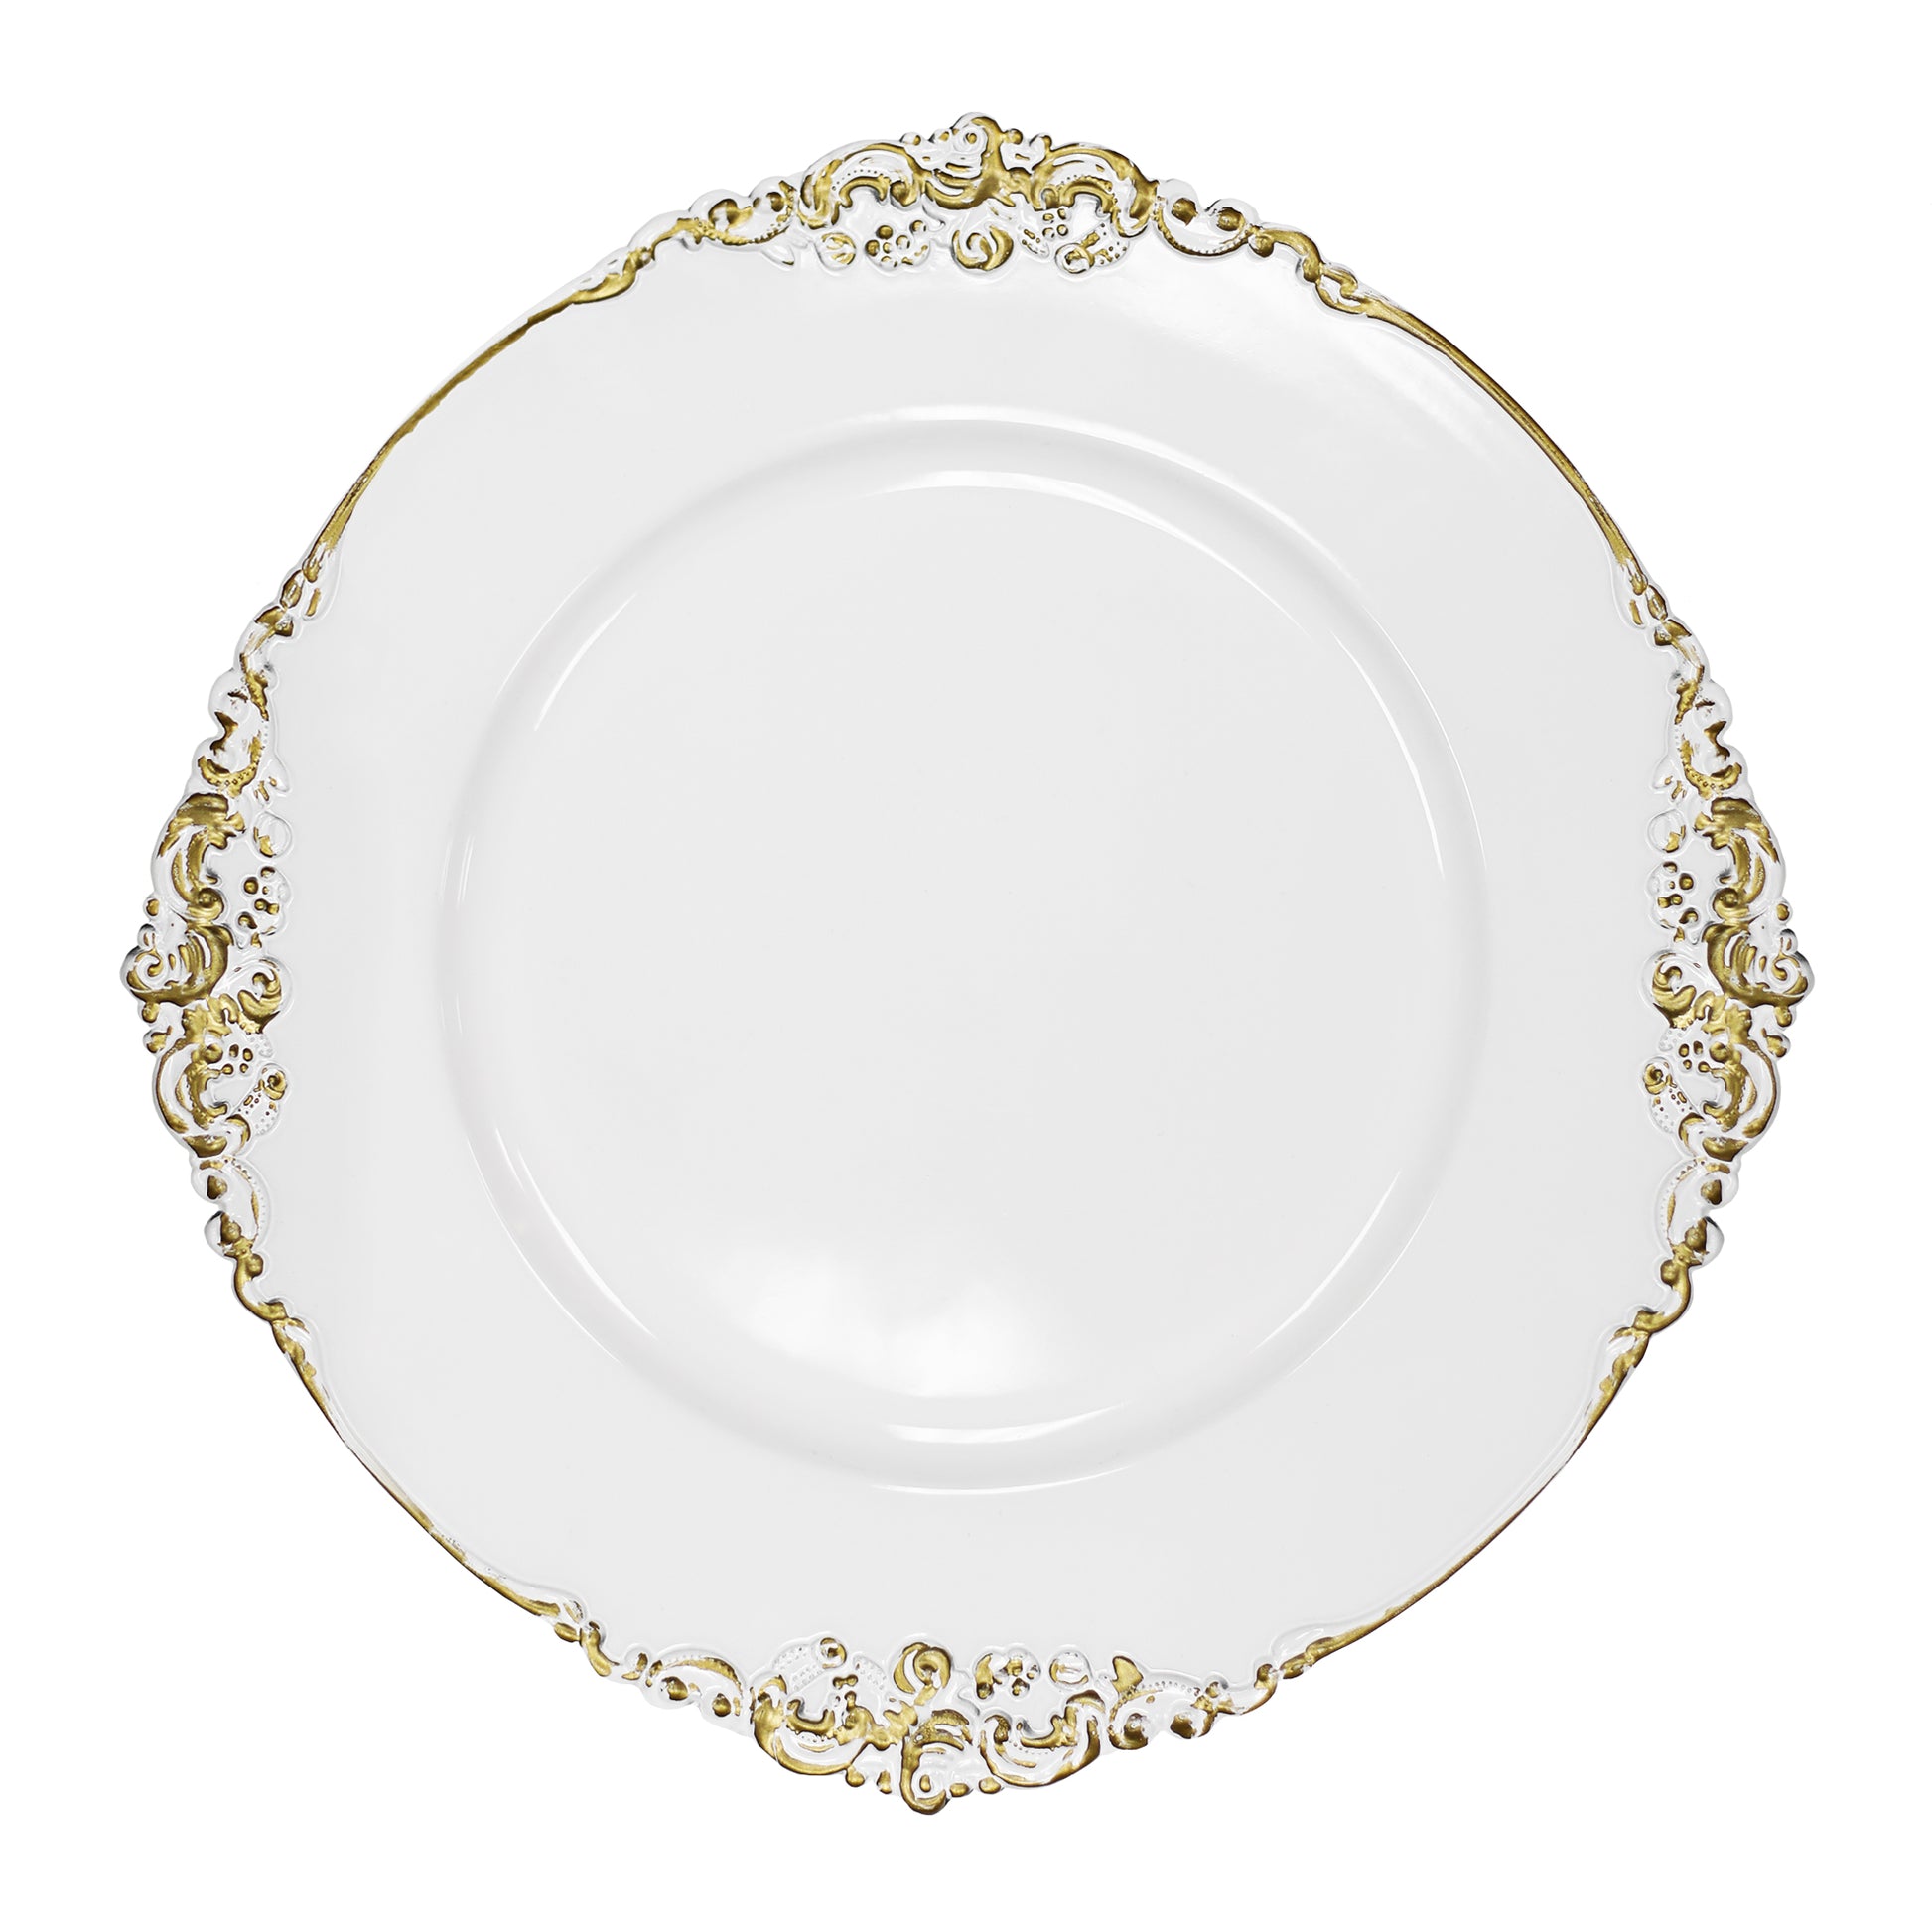 Vintage Round Charger Plate - White Gold-Trimmed - CV Linens